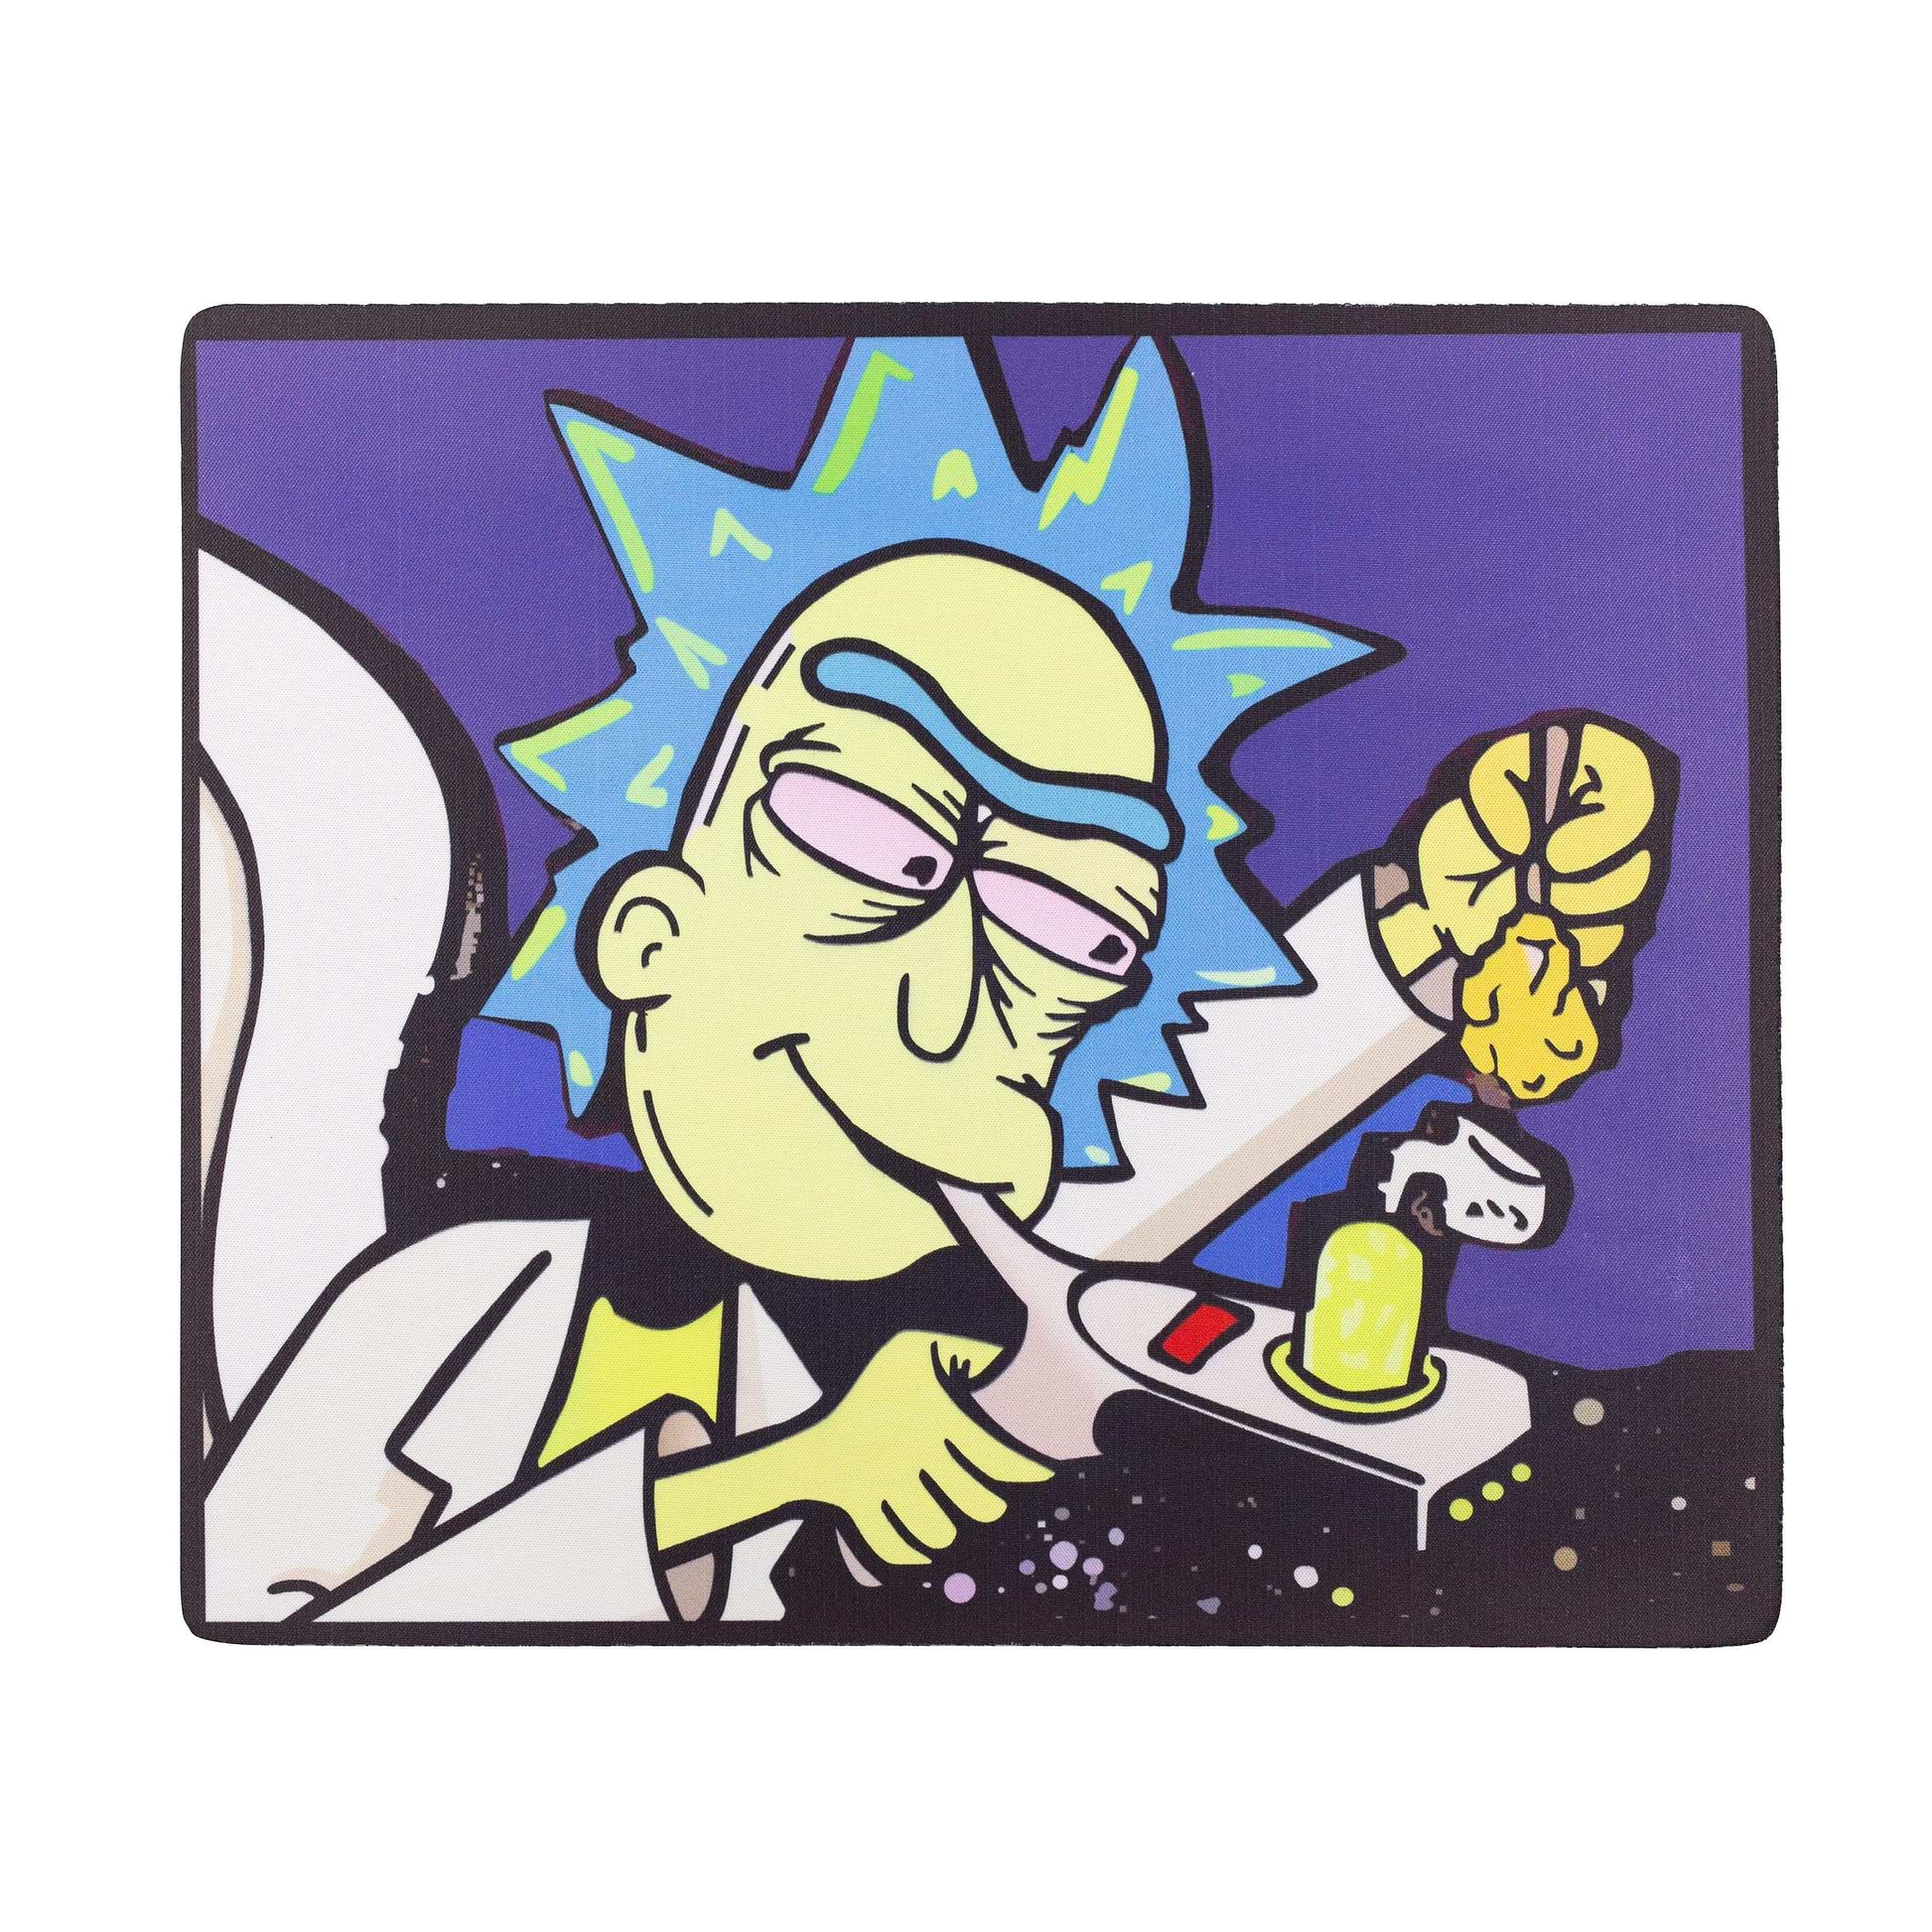 Square 10 x 12 mat smoking accessory with Rick dabbing smoking weed in outer space design